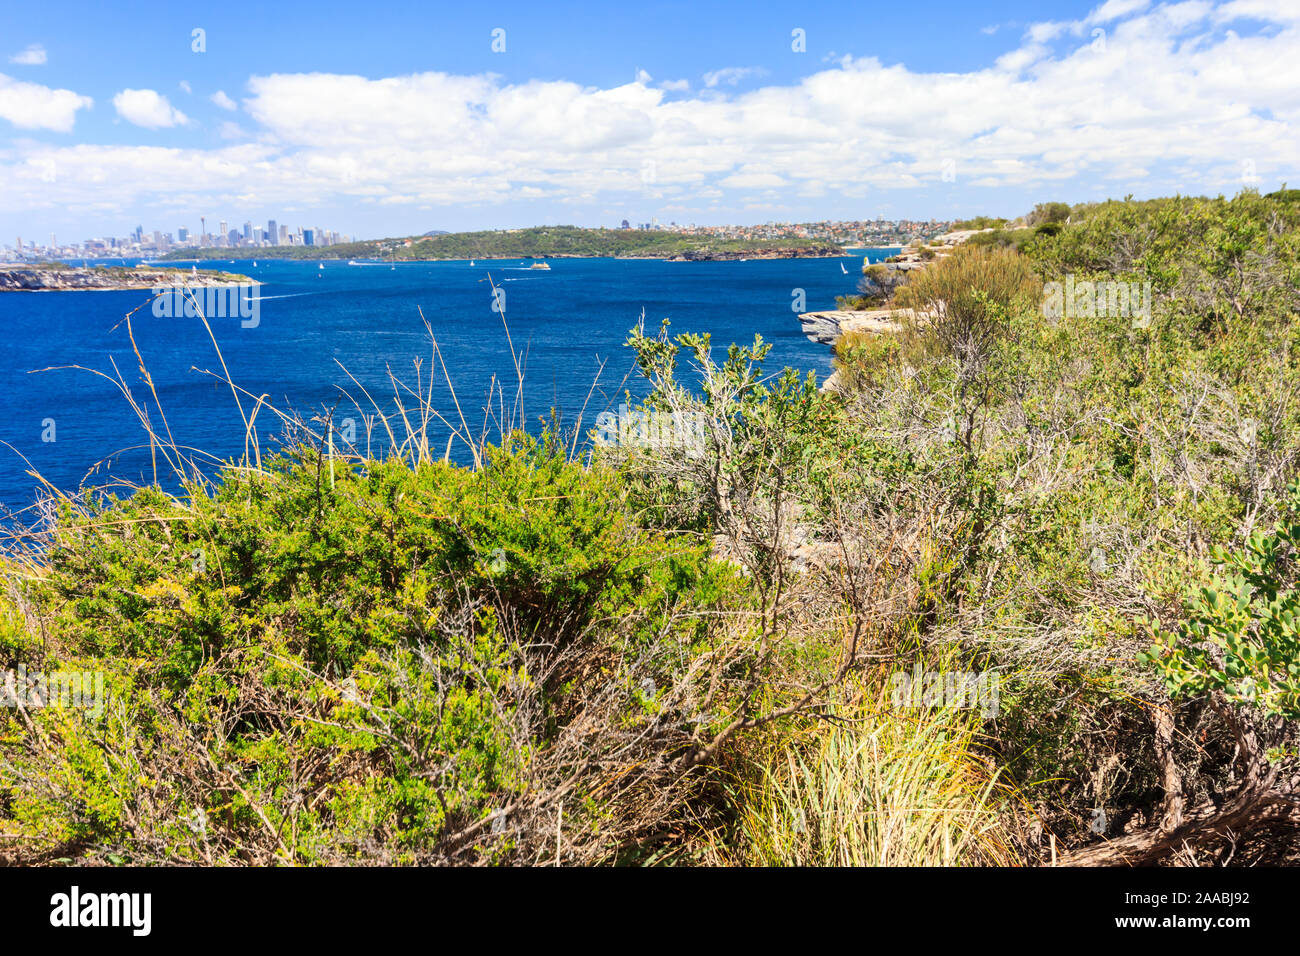 View of Sydney Harbor entrance from North Point with Sydney skyline in the background, Australia Stock Photo